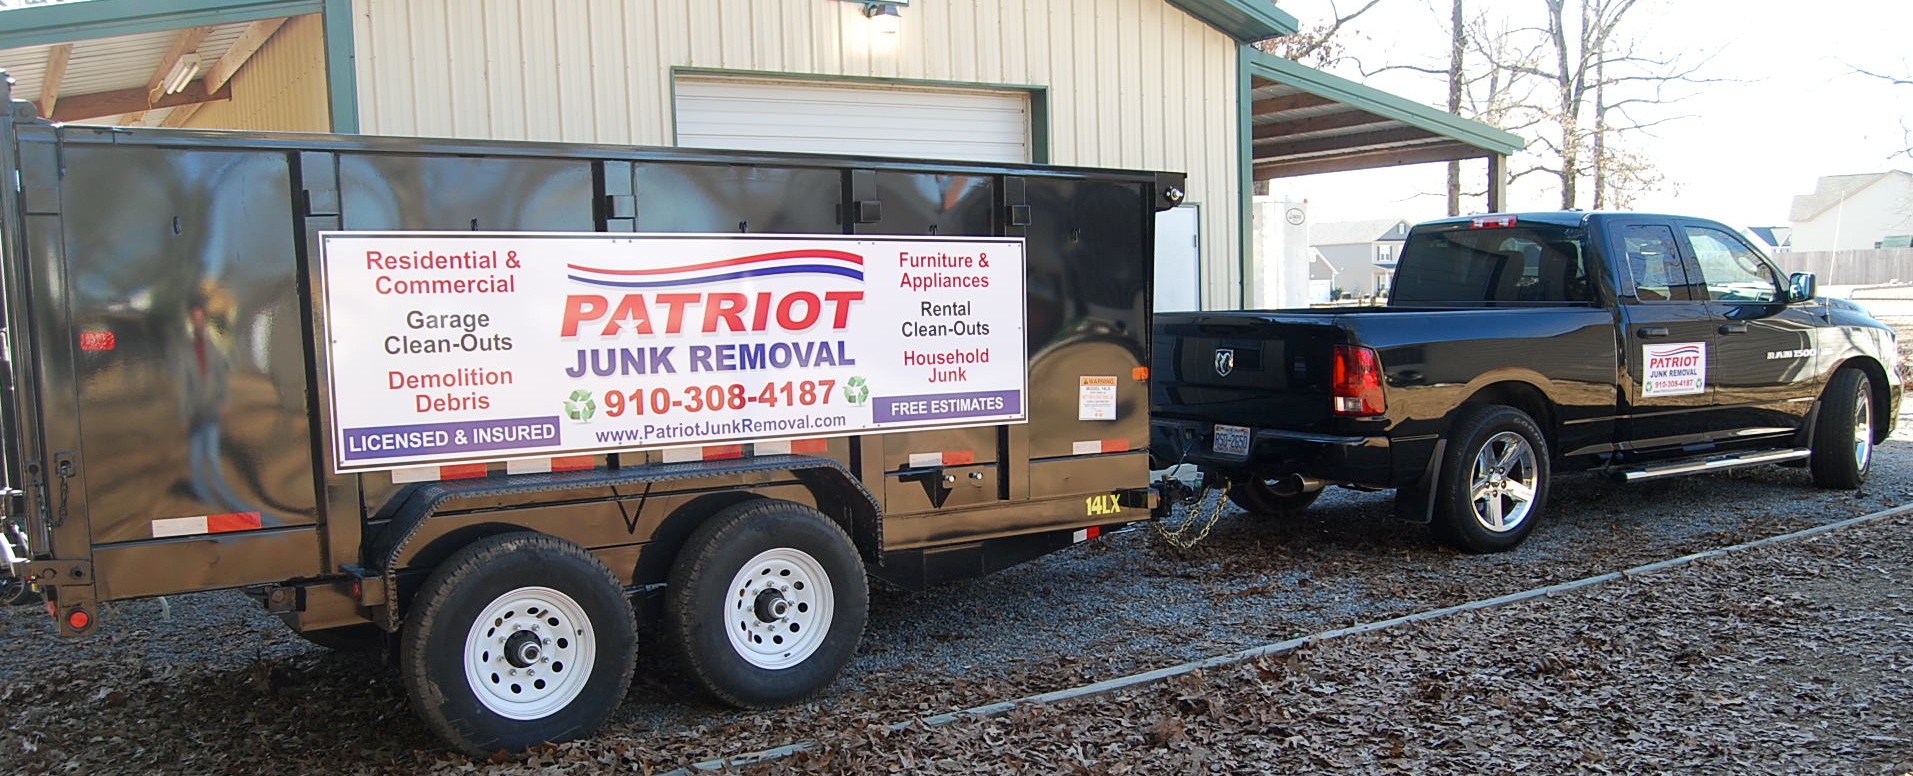 Cumberland County Nc Junk Removal Patriot Junk Removal